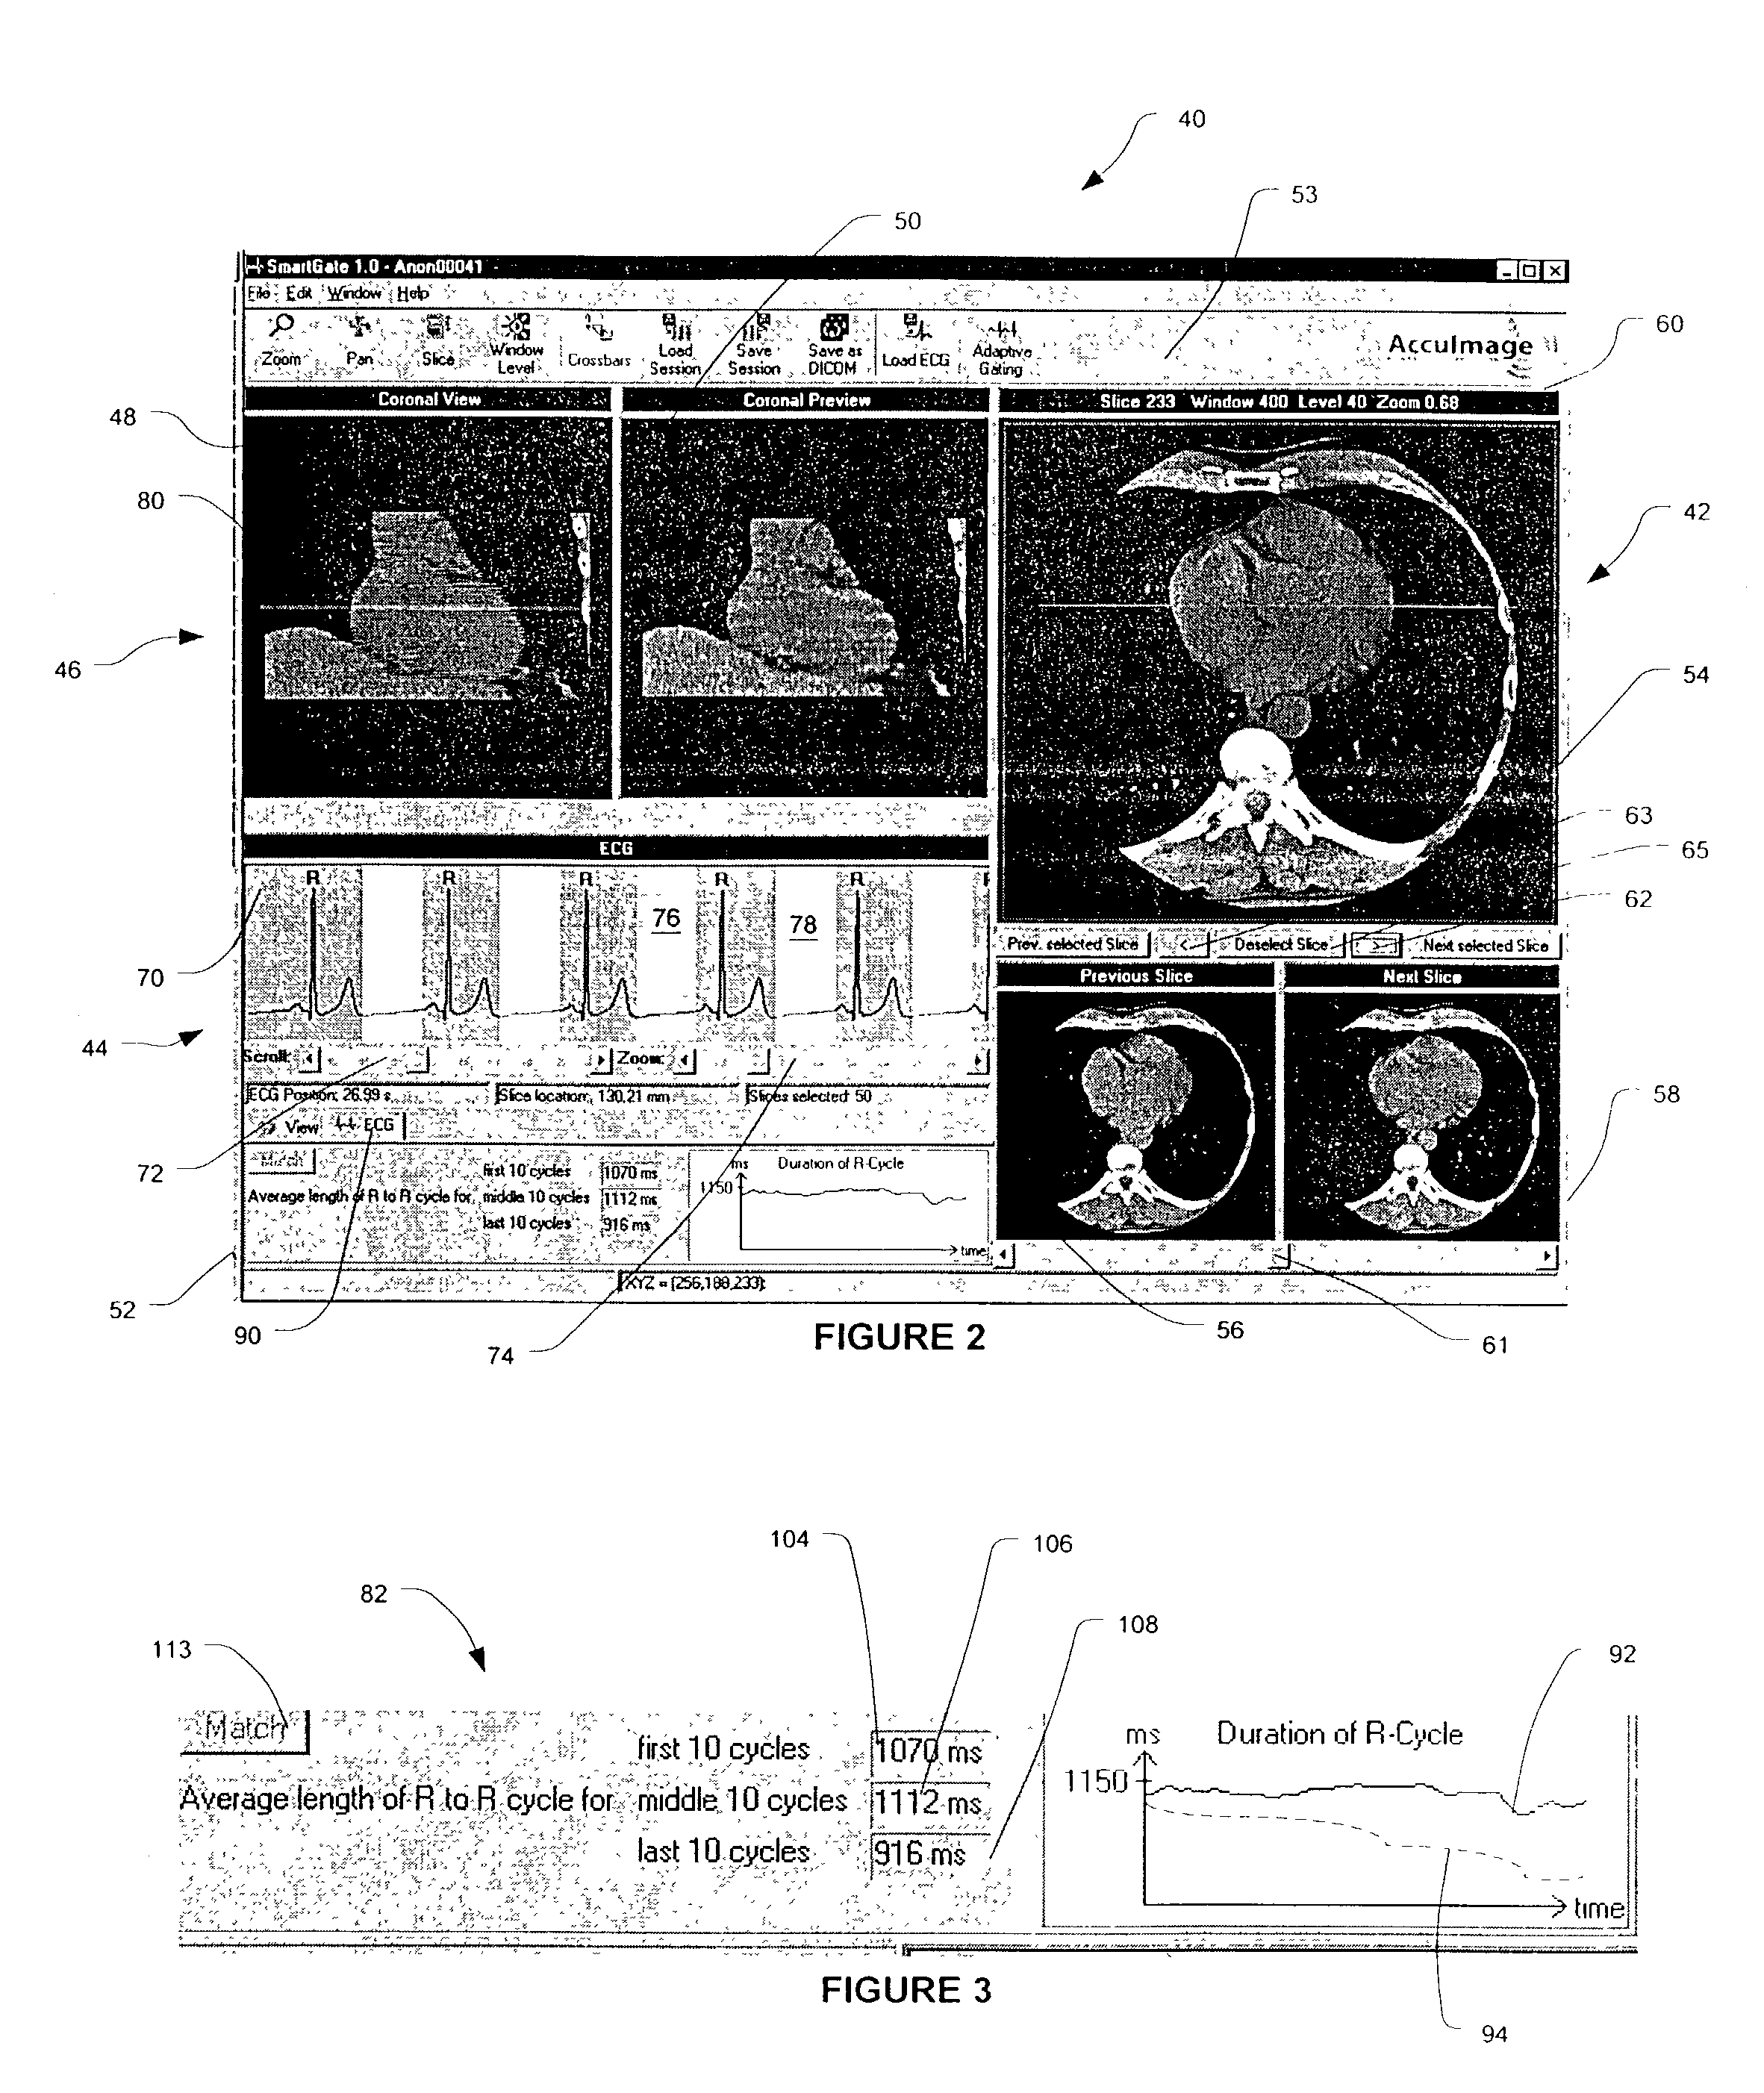 Methods and software for self-gating a set of images